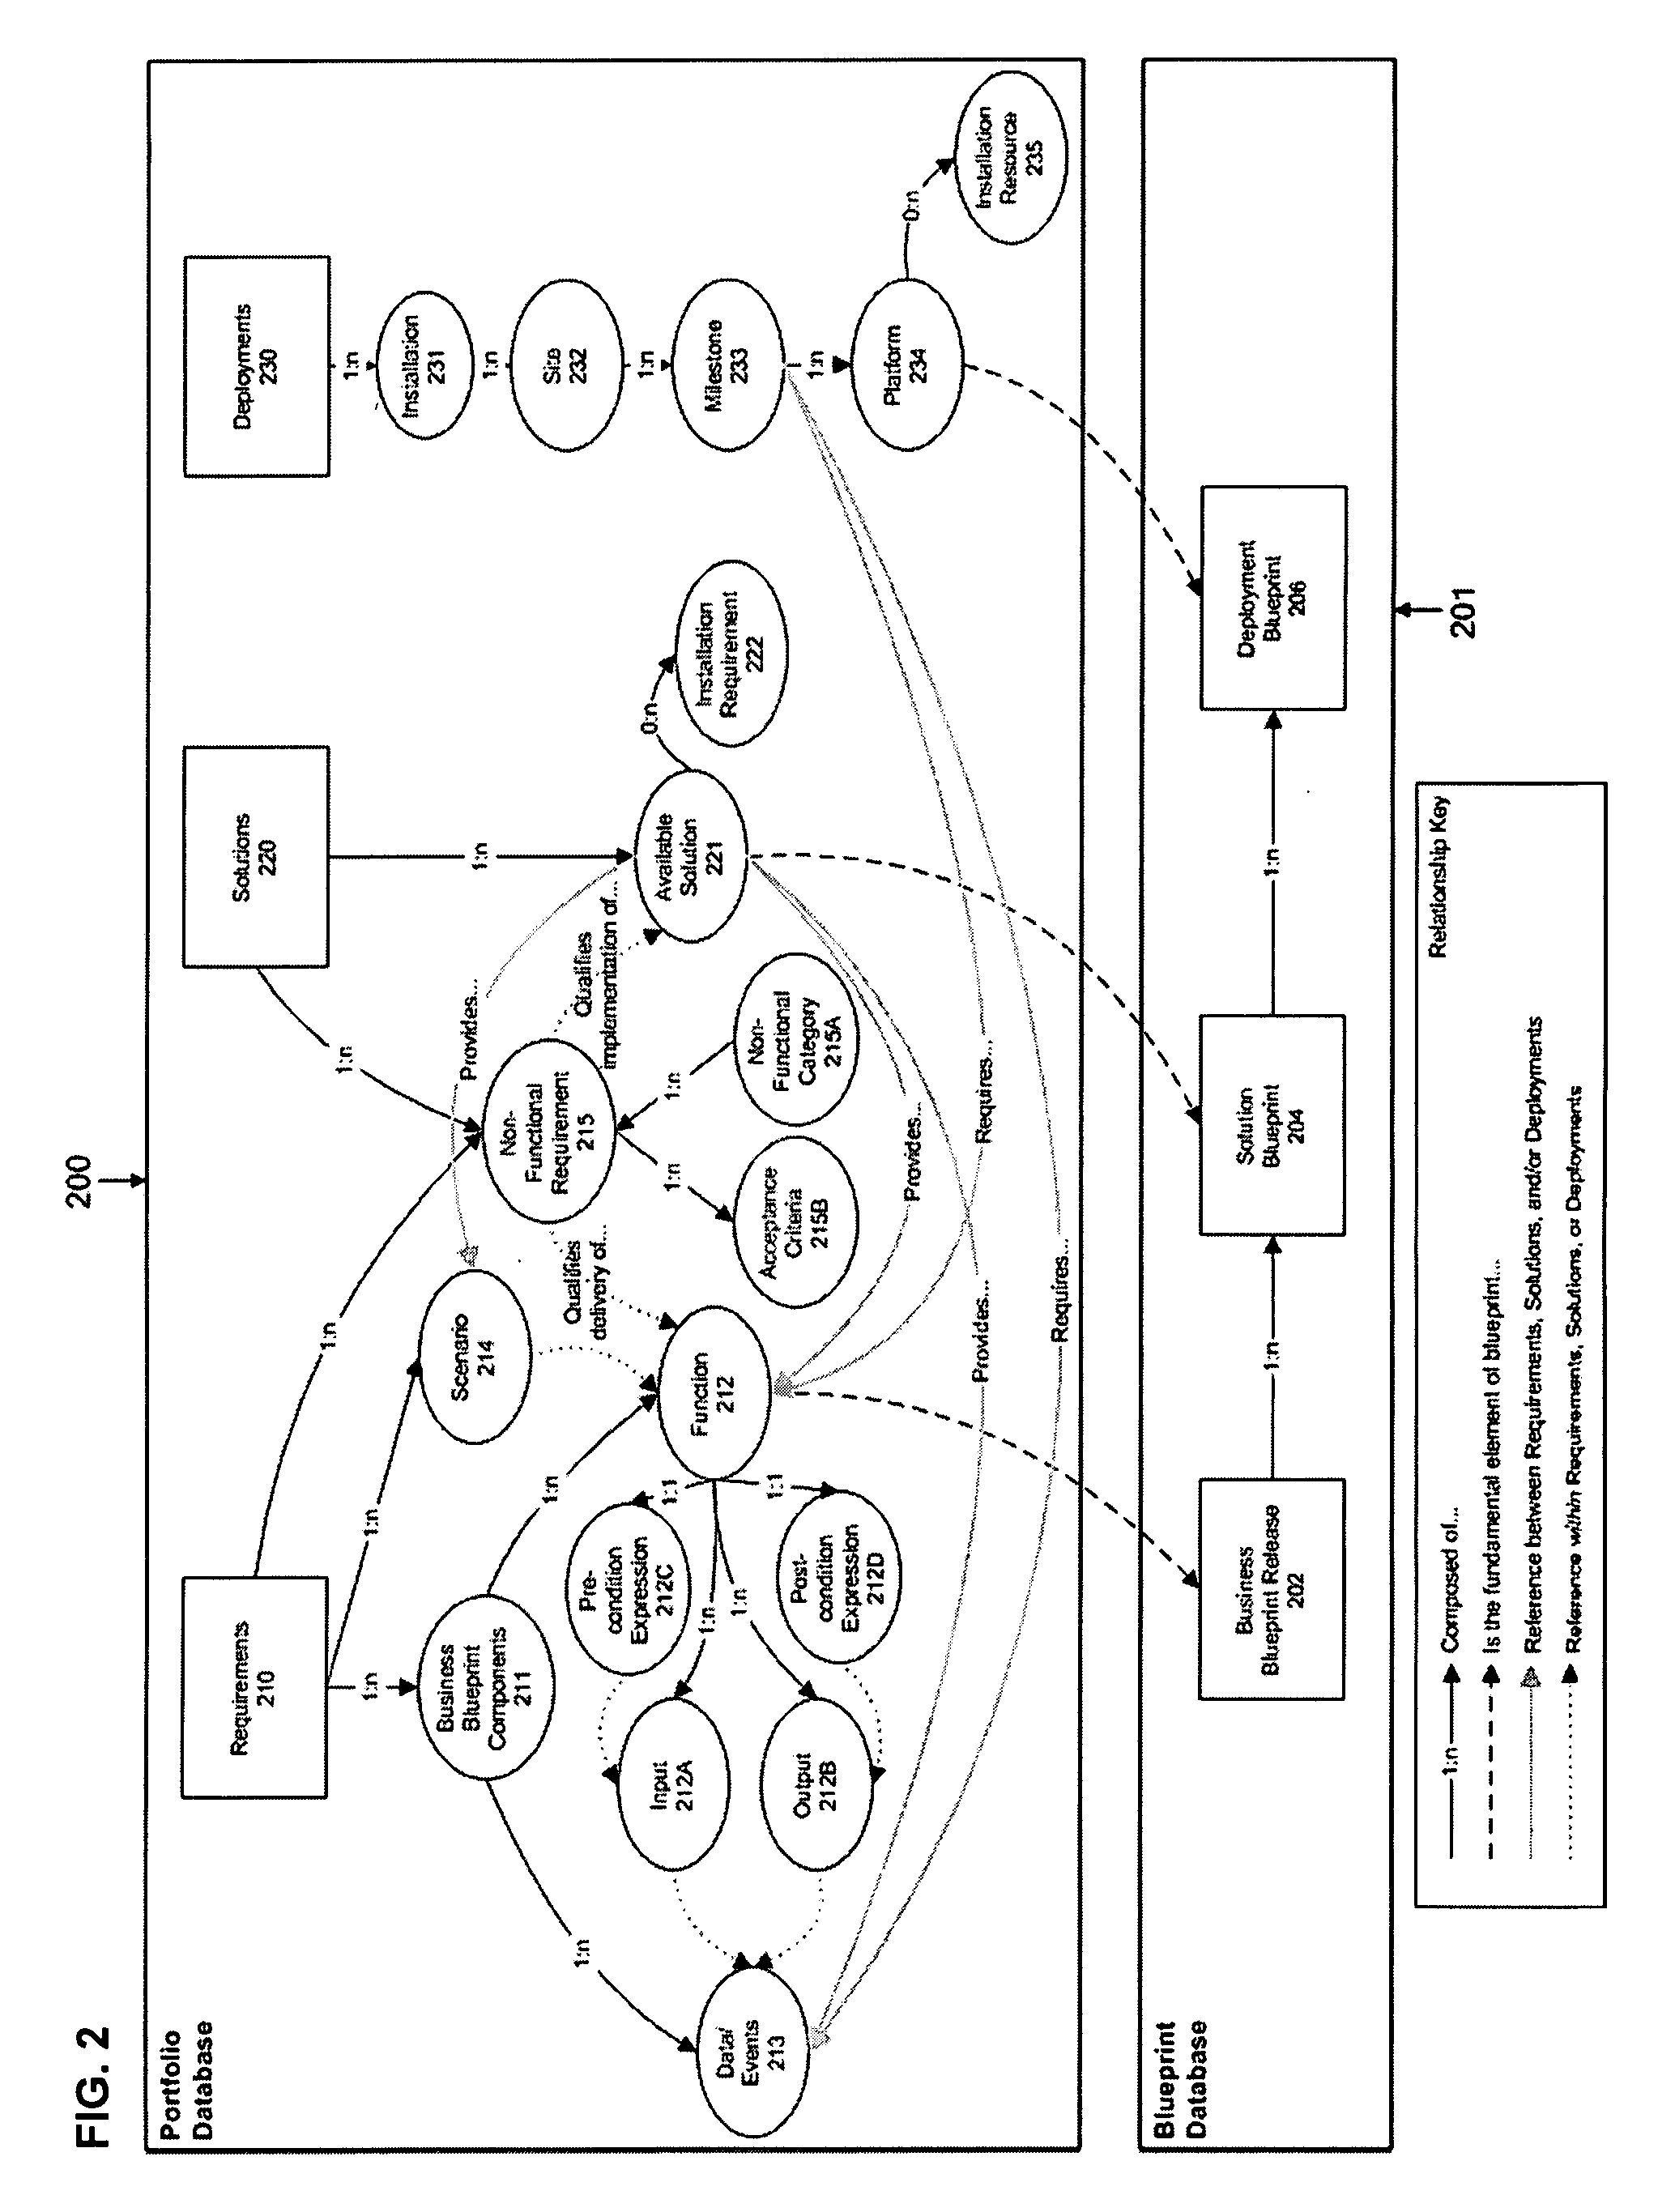 Methods and tools for creating and evaluating system blueprints